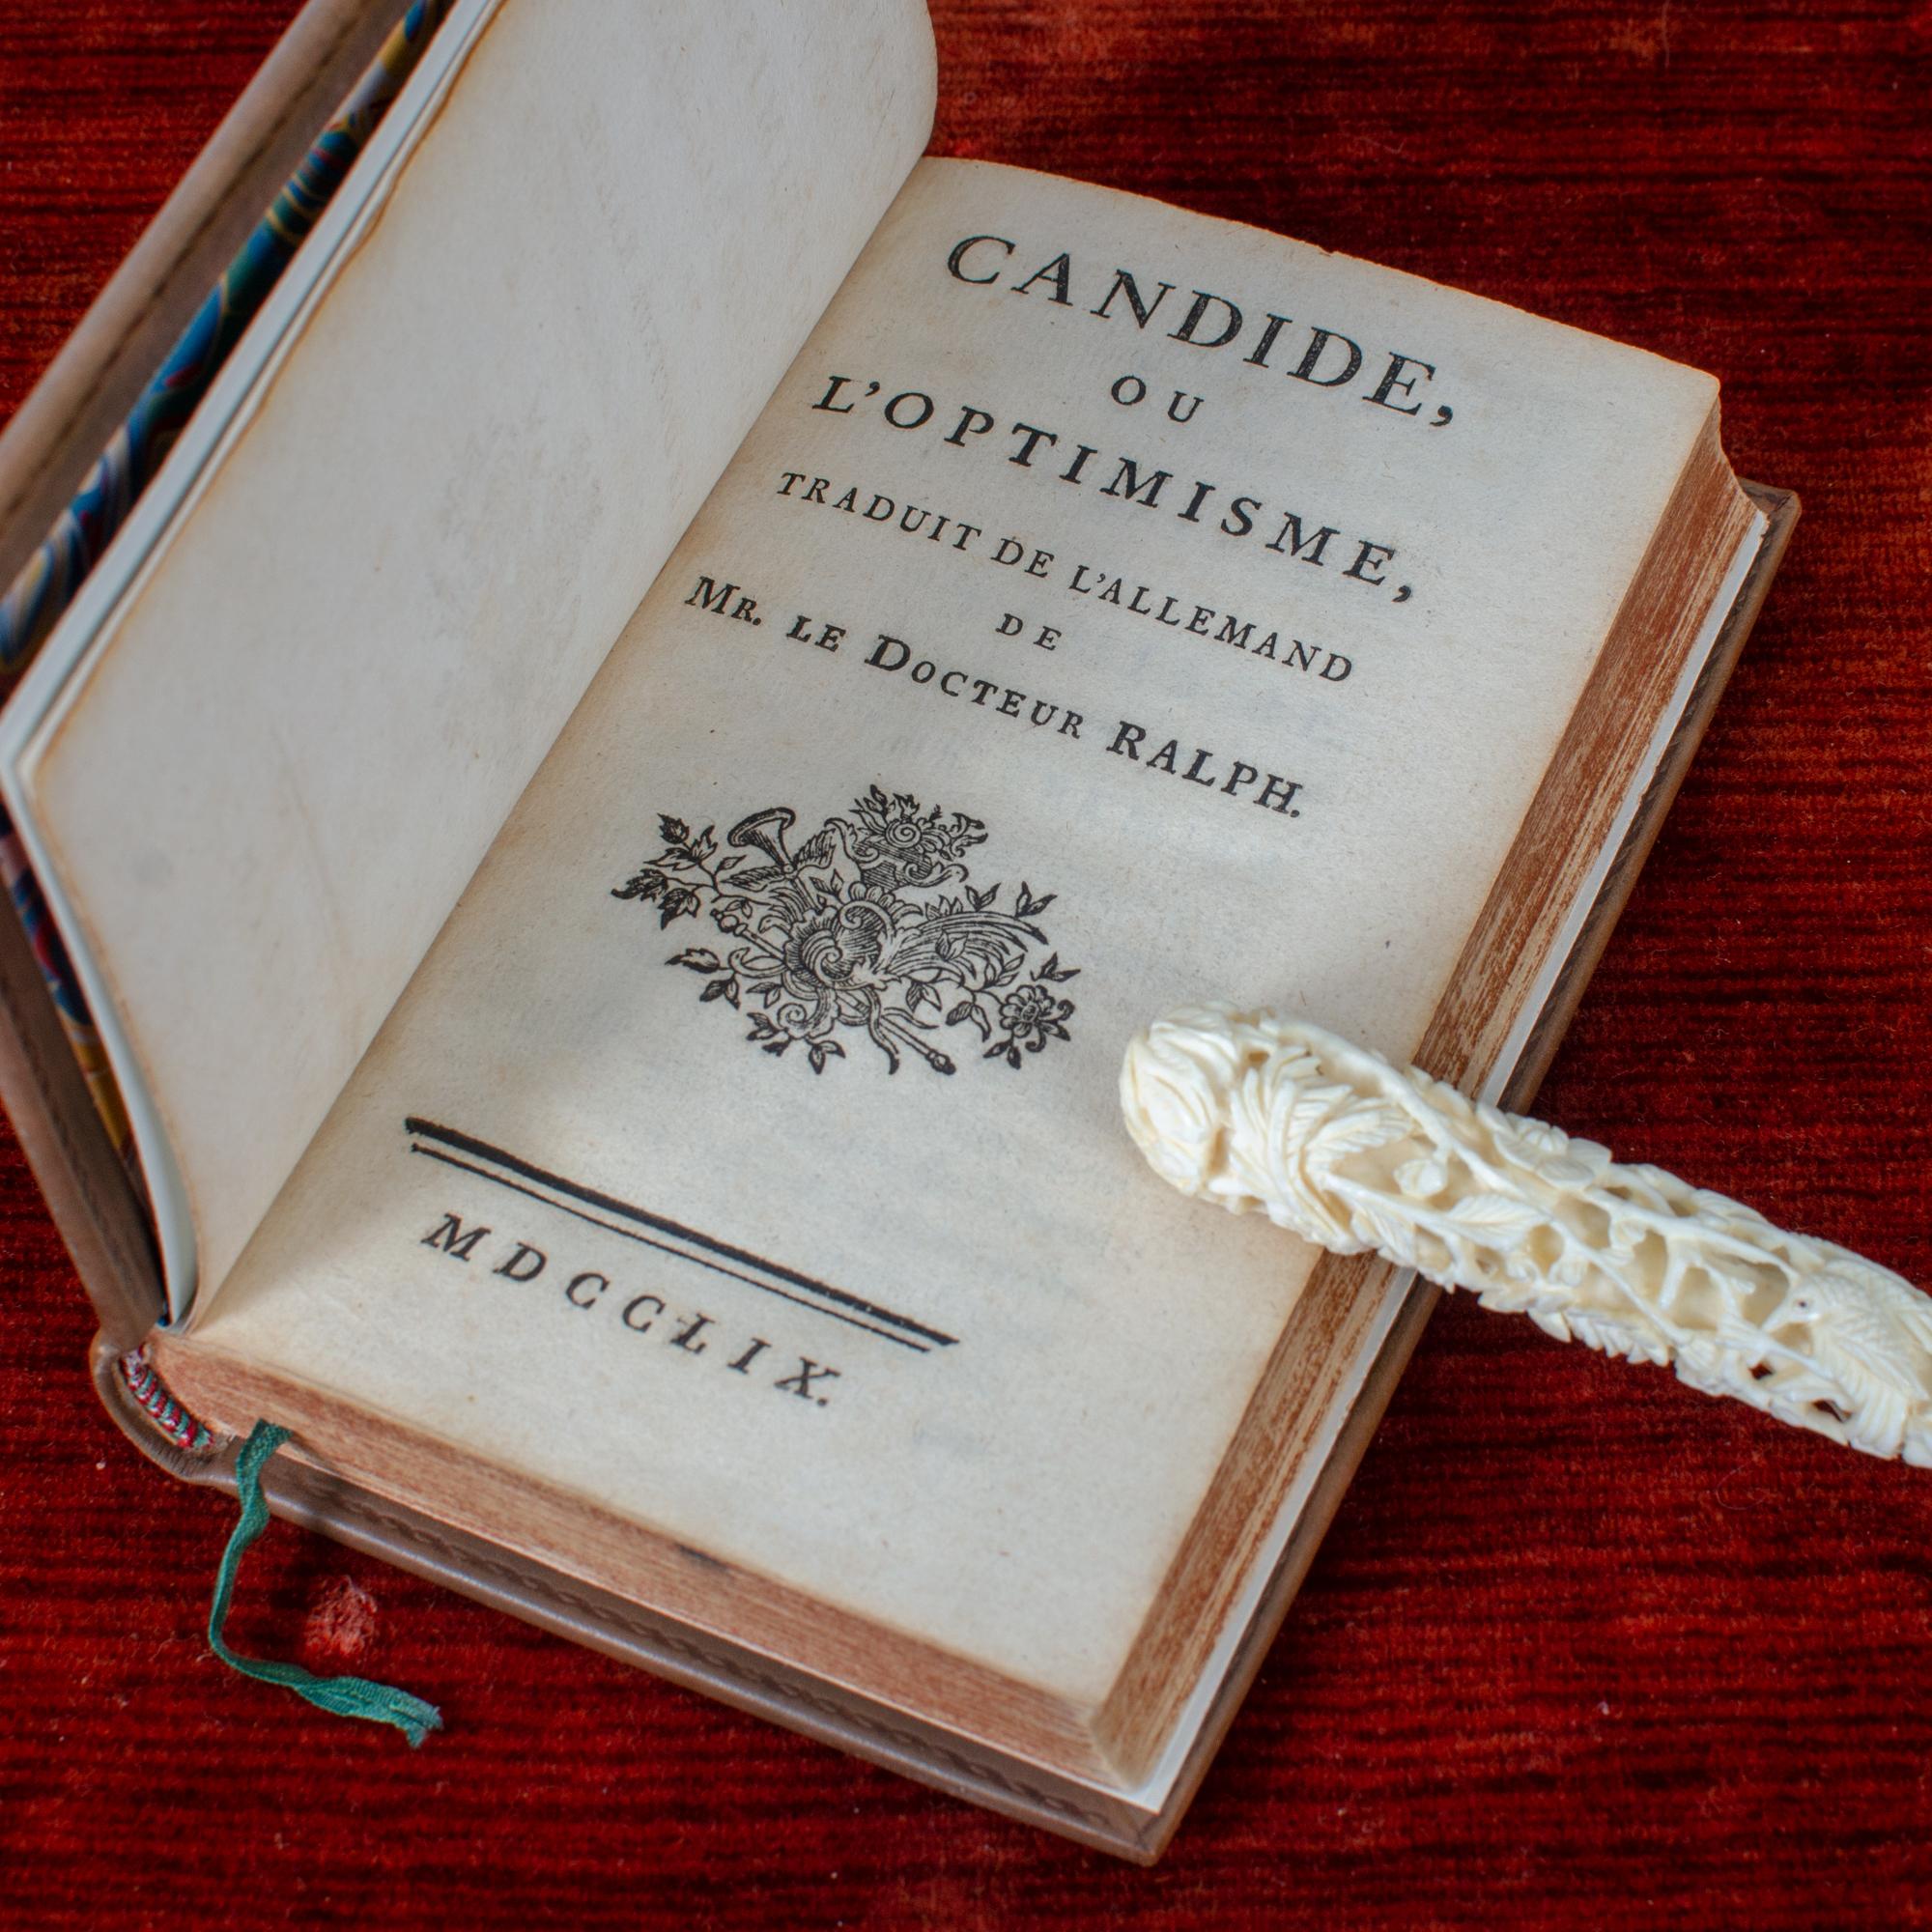 Swiss Voltaire's Candide True First Edition & First London Edition For Sale